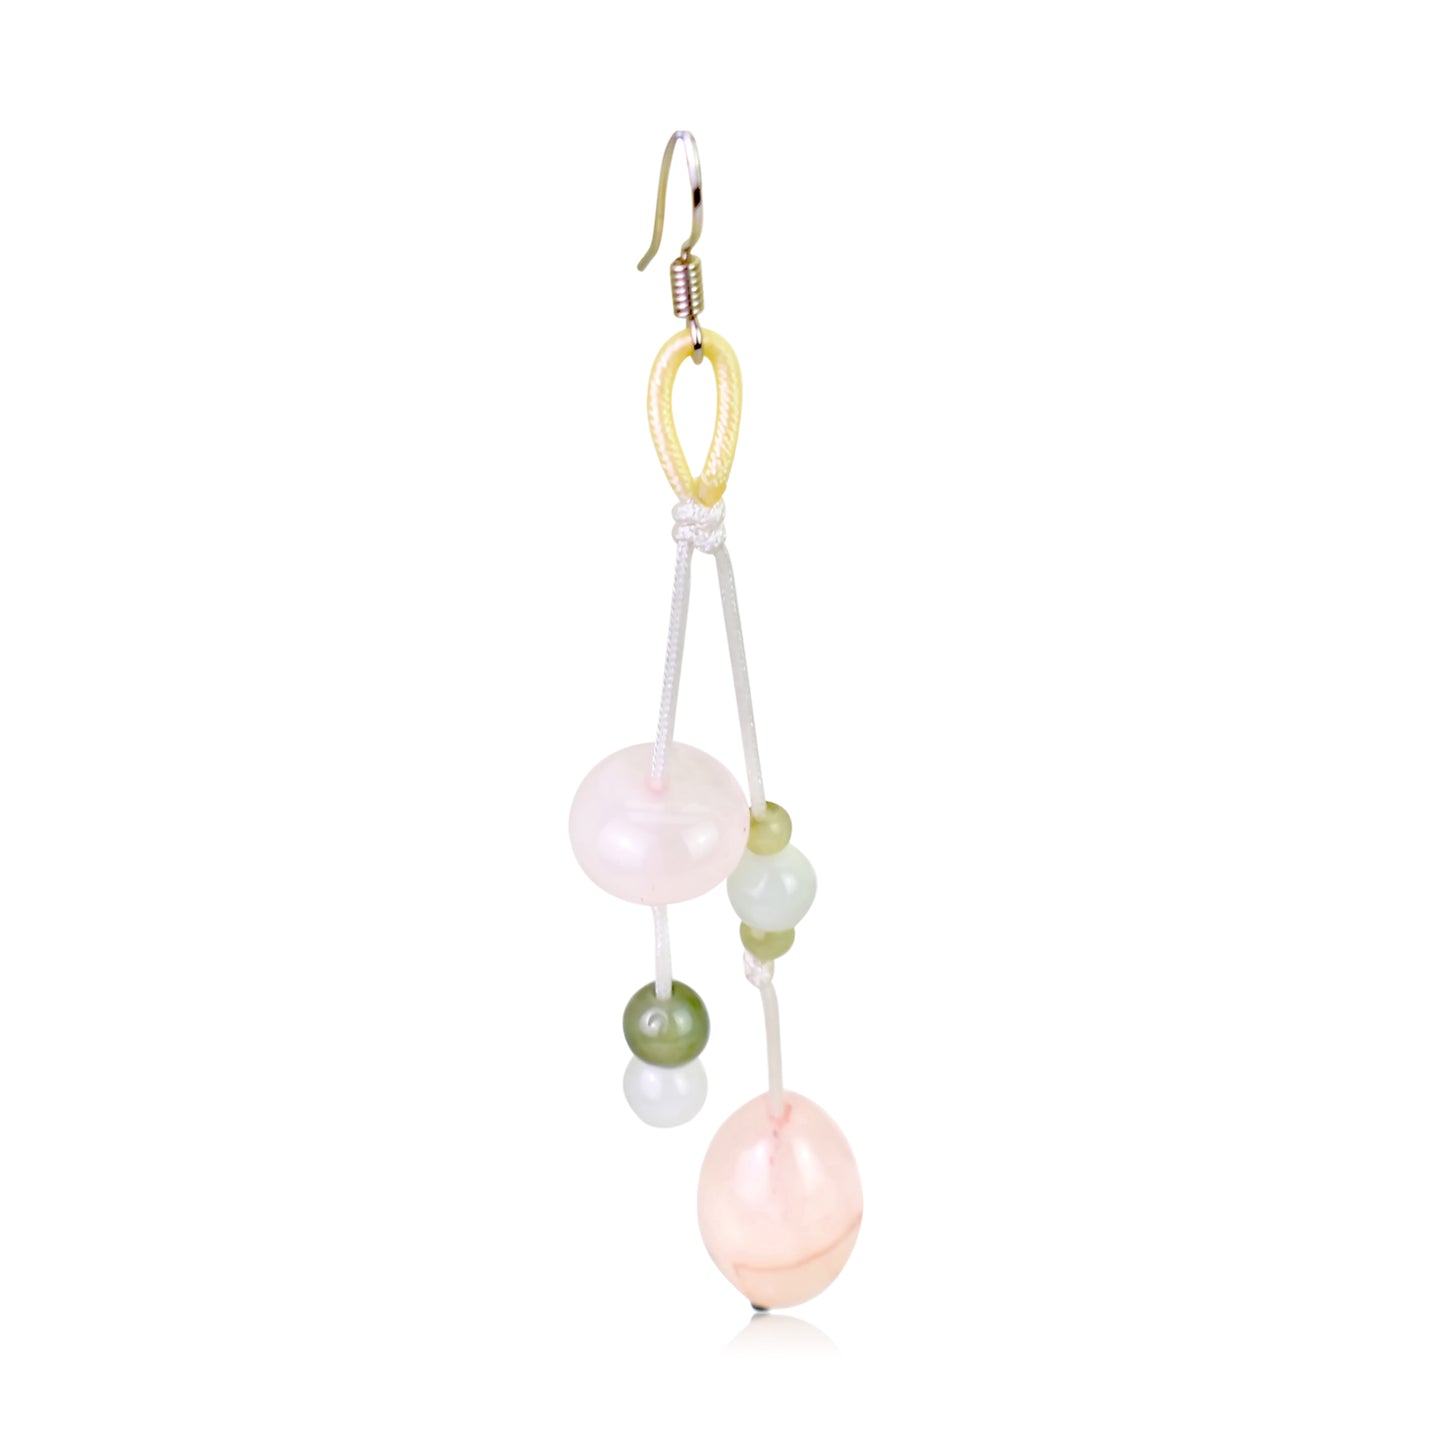 Put the Love into Your Look with Exquisite Rose Quartz Earrings made with White Cord